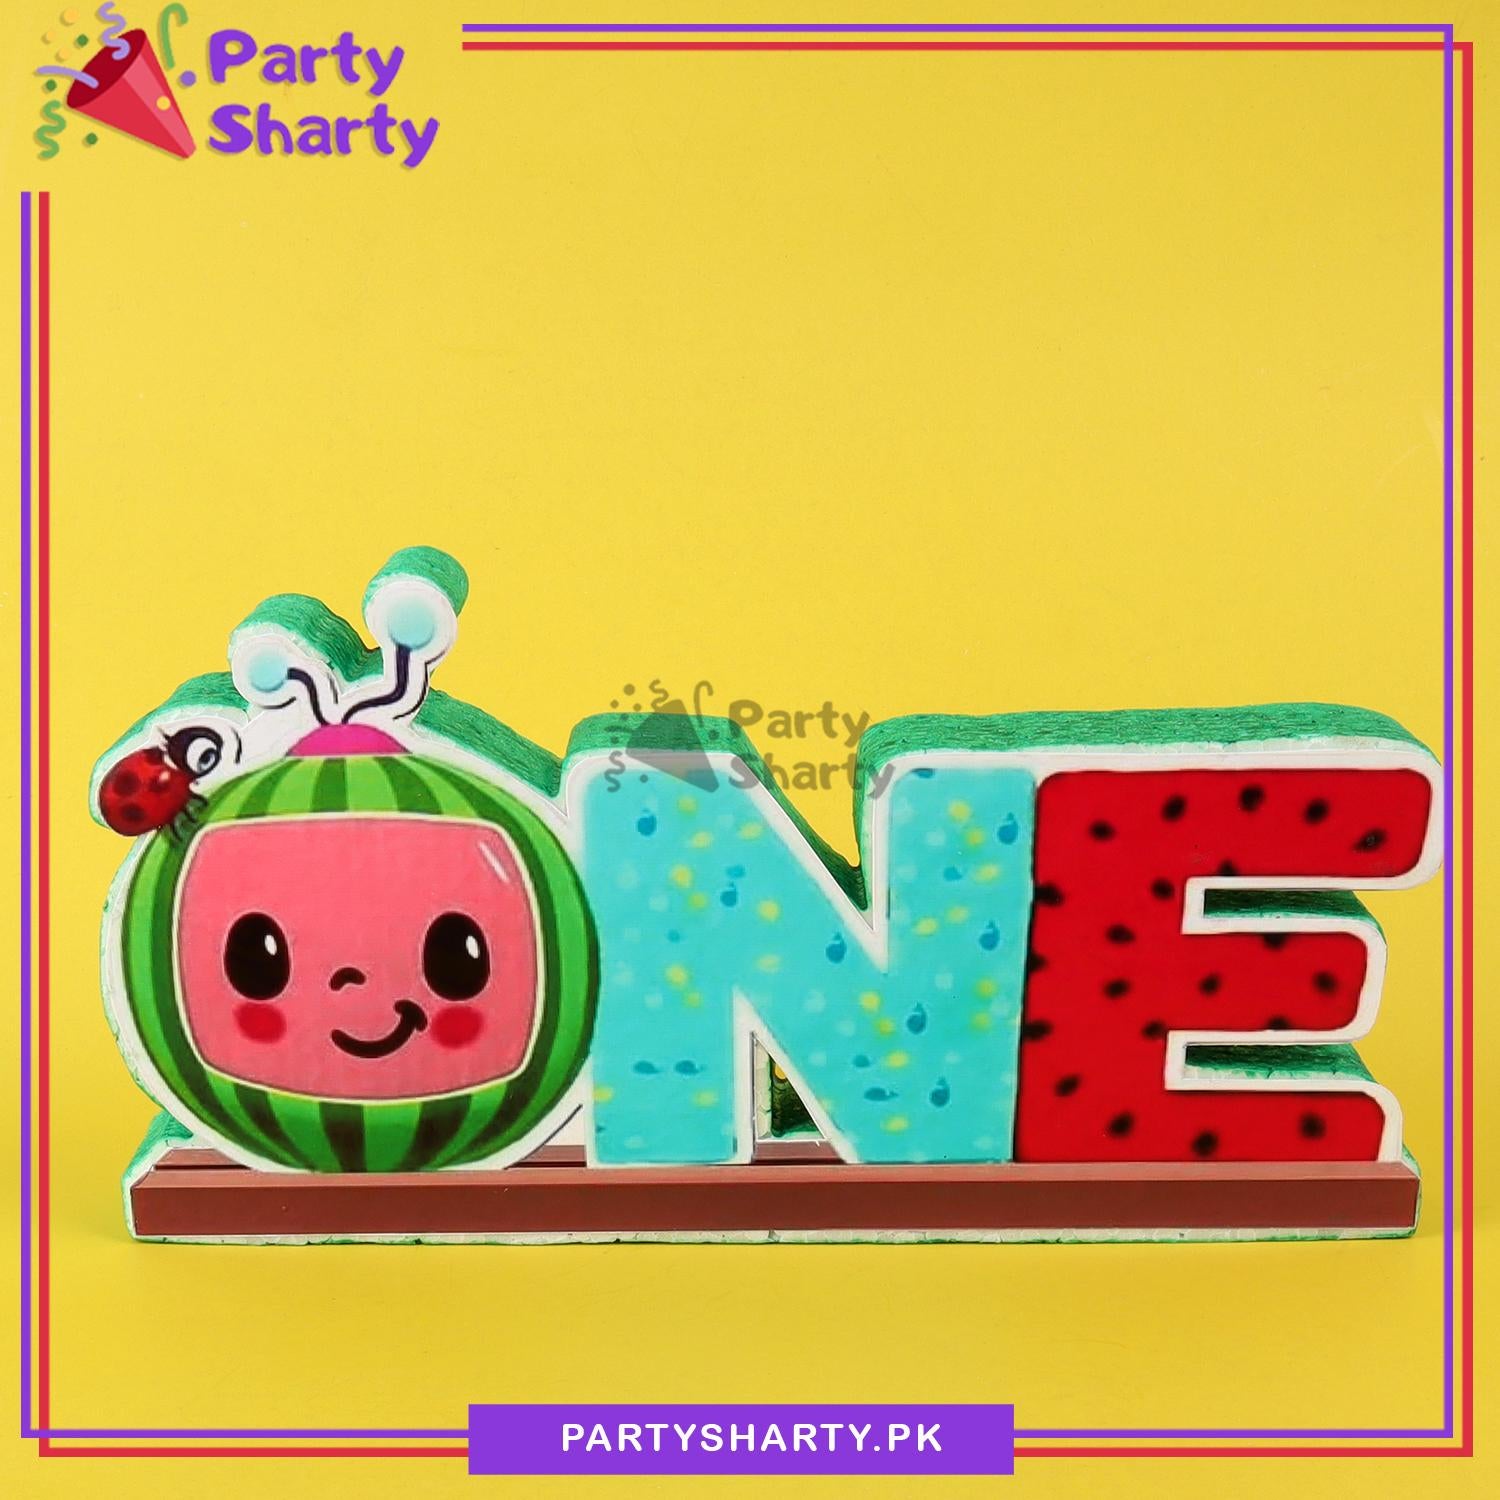 Cocomelon ONE Thermocol Standee For Cocomelon / Watermelon Theme Based First Birthday Celebration and Party Decoration